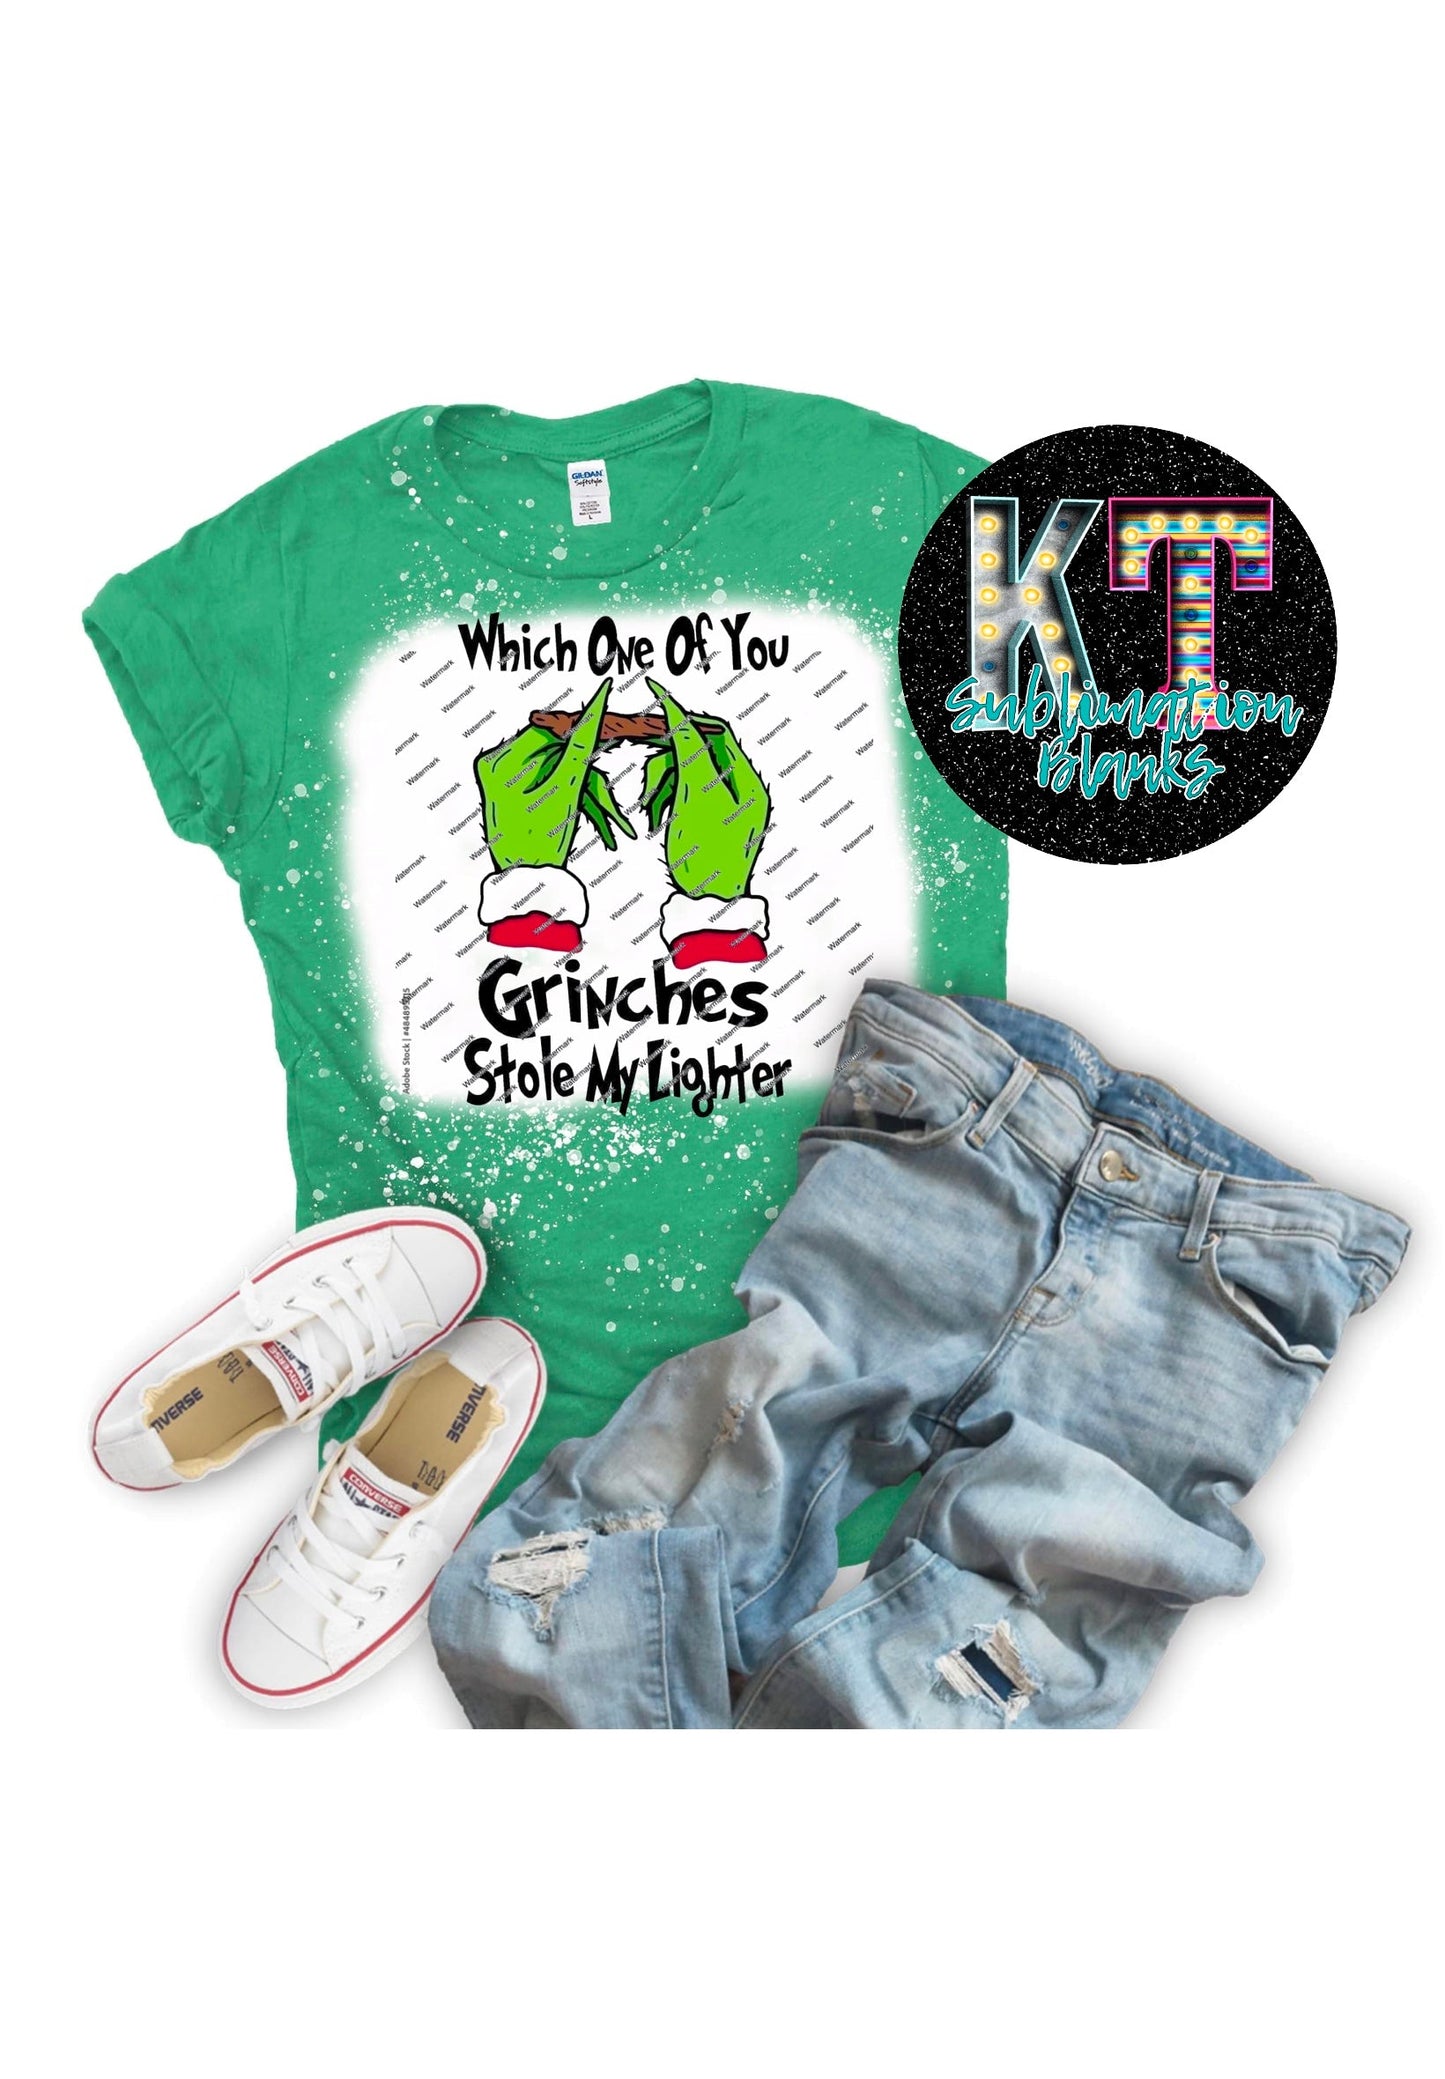 Wchin one of you Grinches Stole my Lighter Christmas  Unisex T-shirt